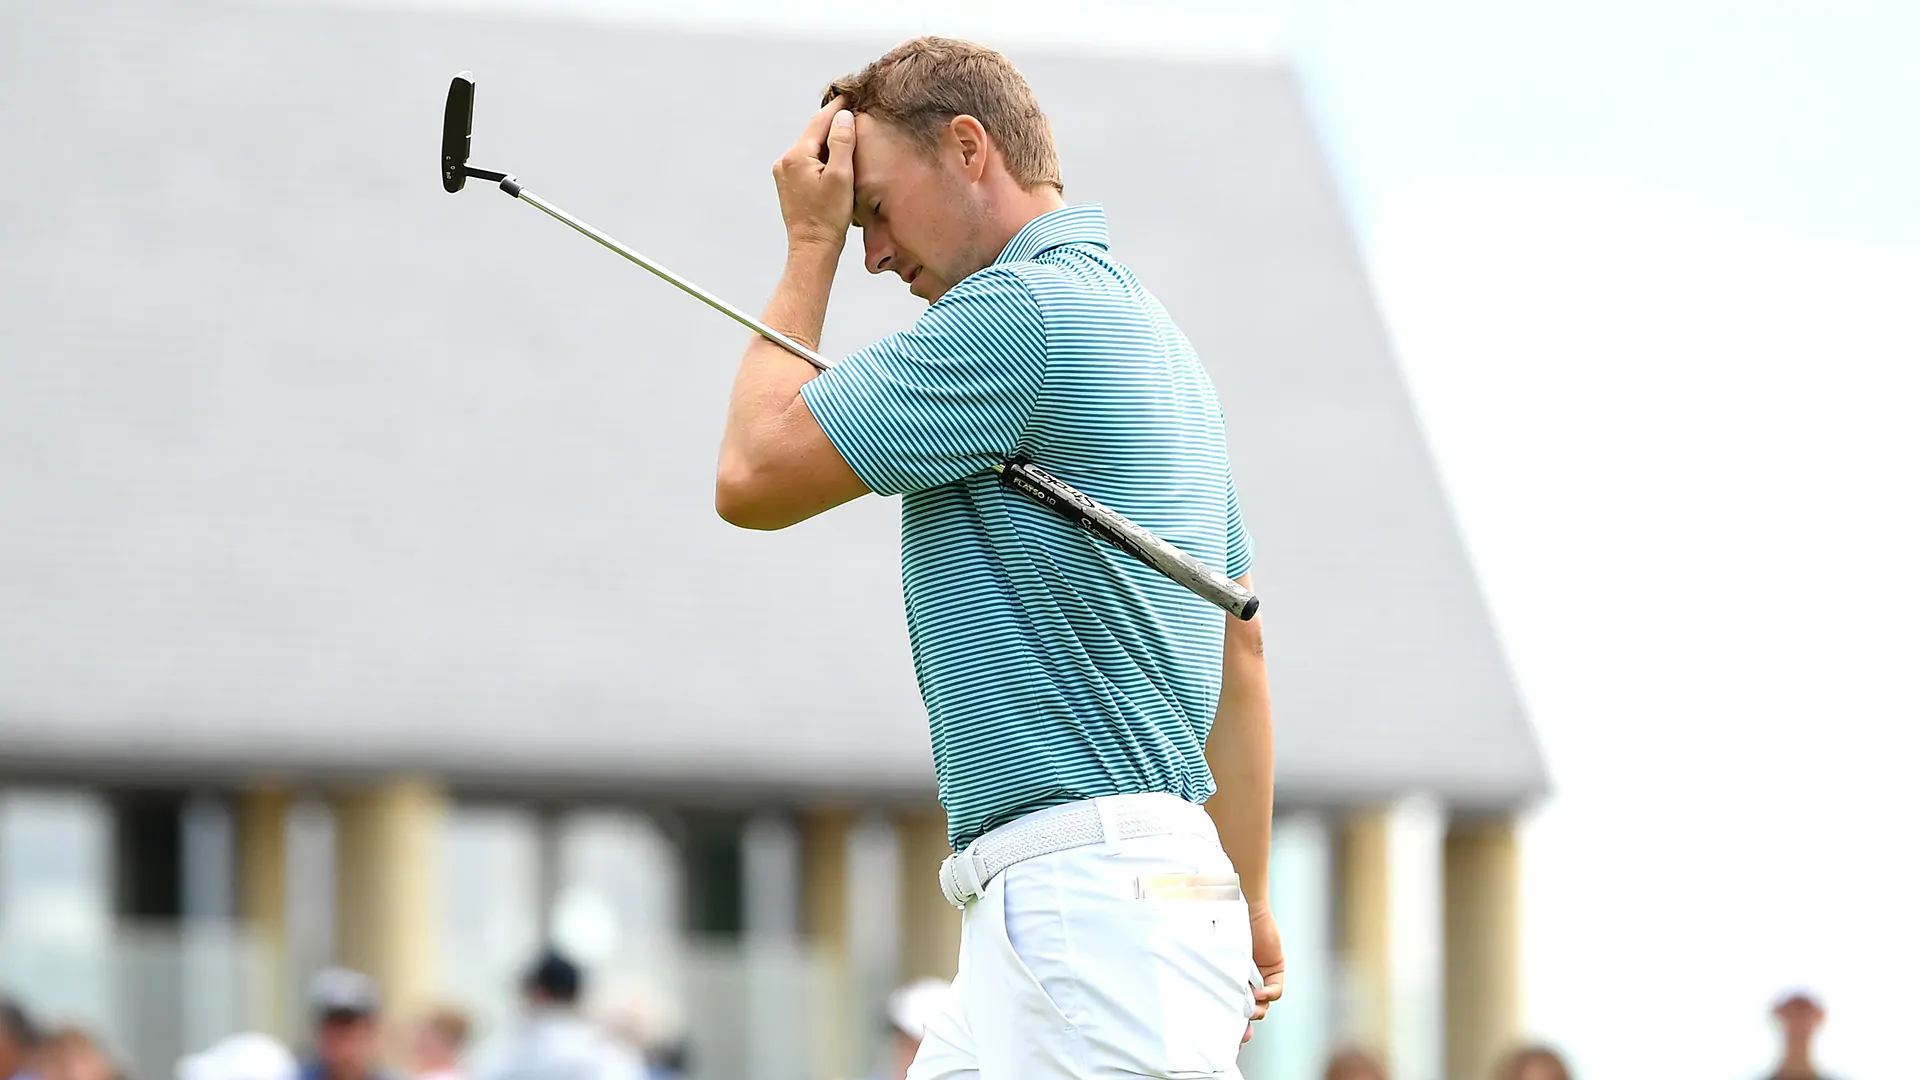 'Brain fart' leads to Spieth's late collapse